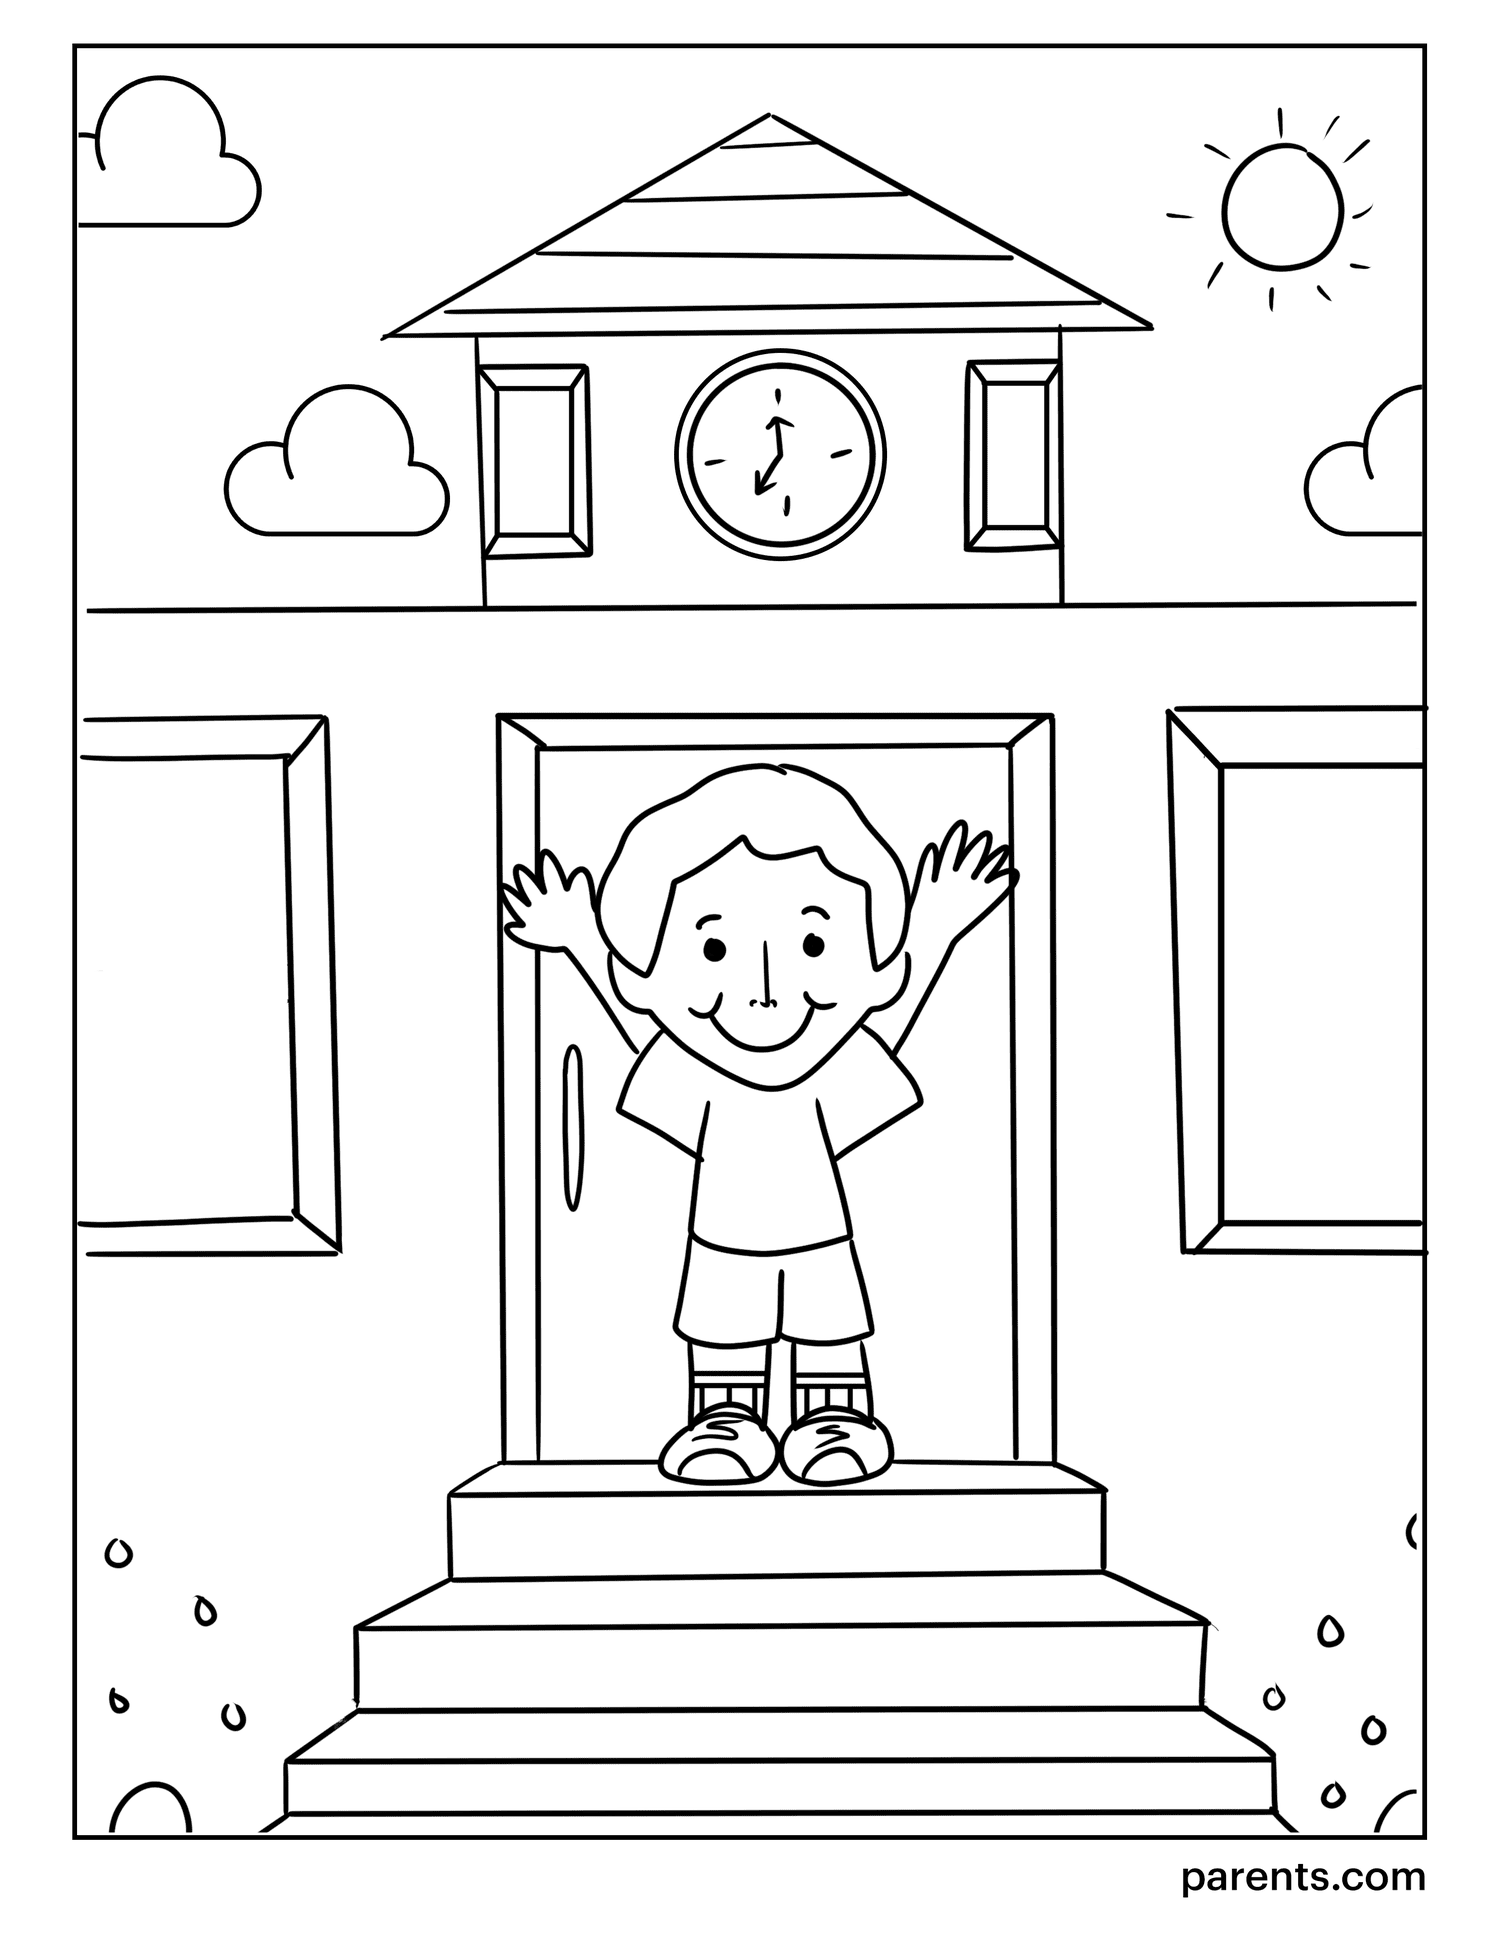 Printable Winter Coloring Pages   Parents